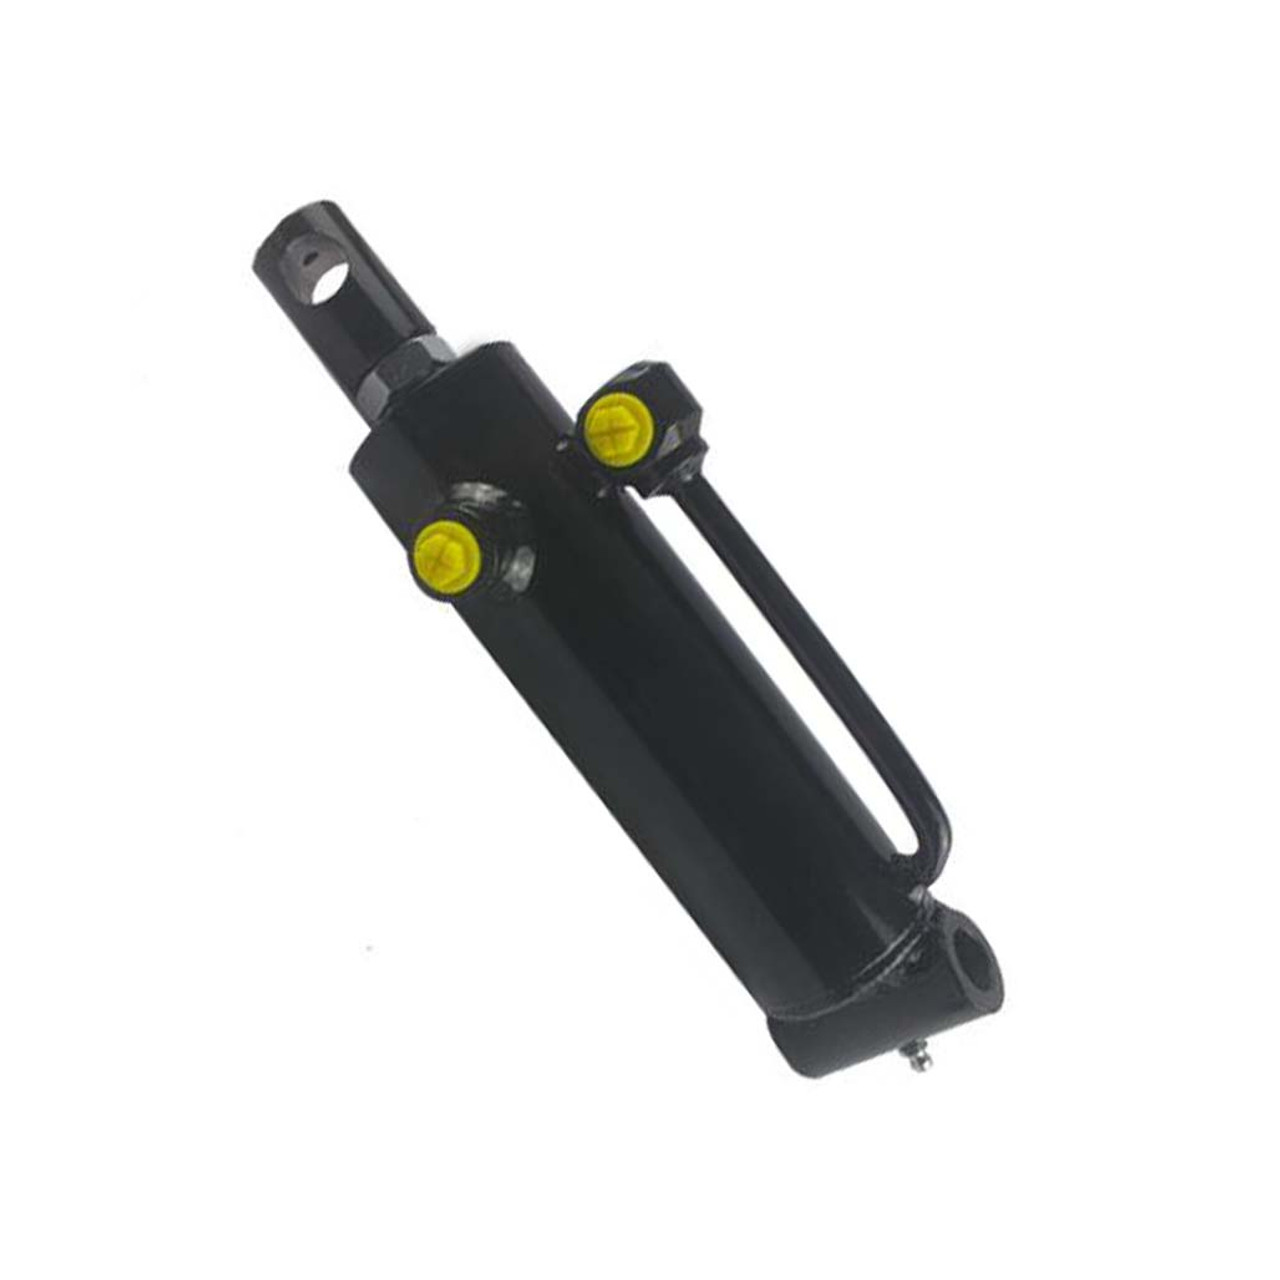 New Hydraulic Cylinder Assembly - Replaces Toro 117-5109